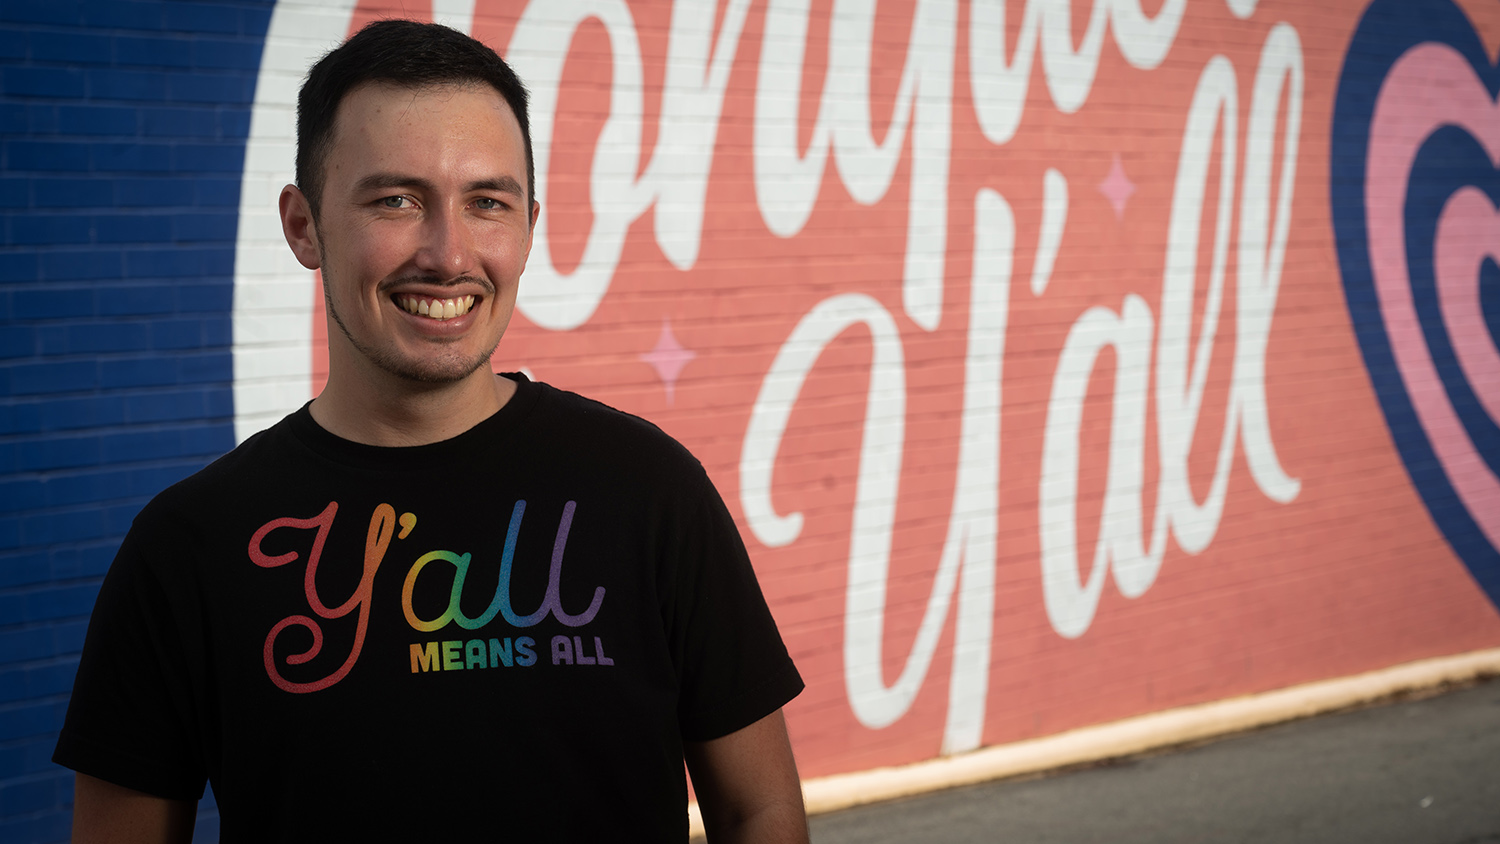 Brody McCurdy stands in front of a mural. The word "y'all" can be seen in the background.